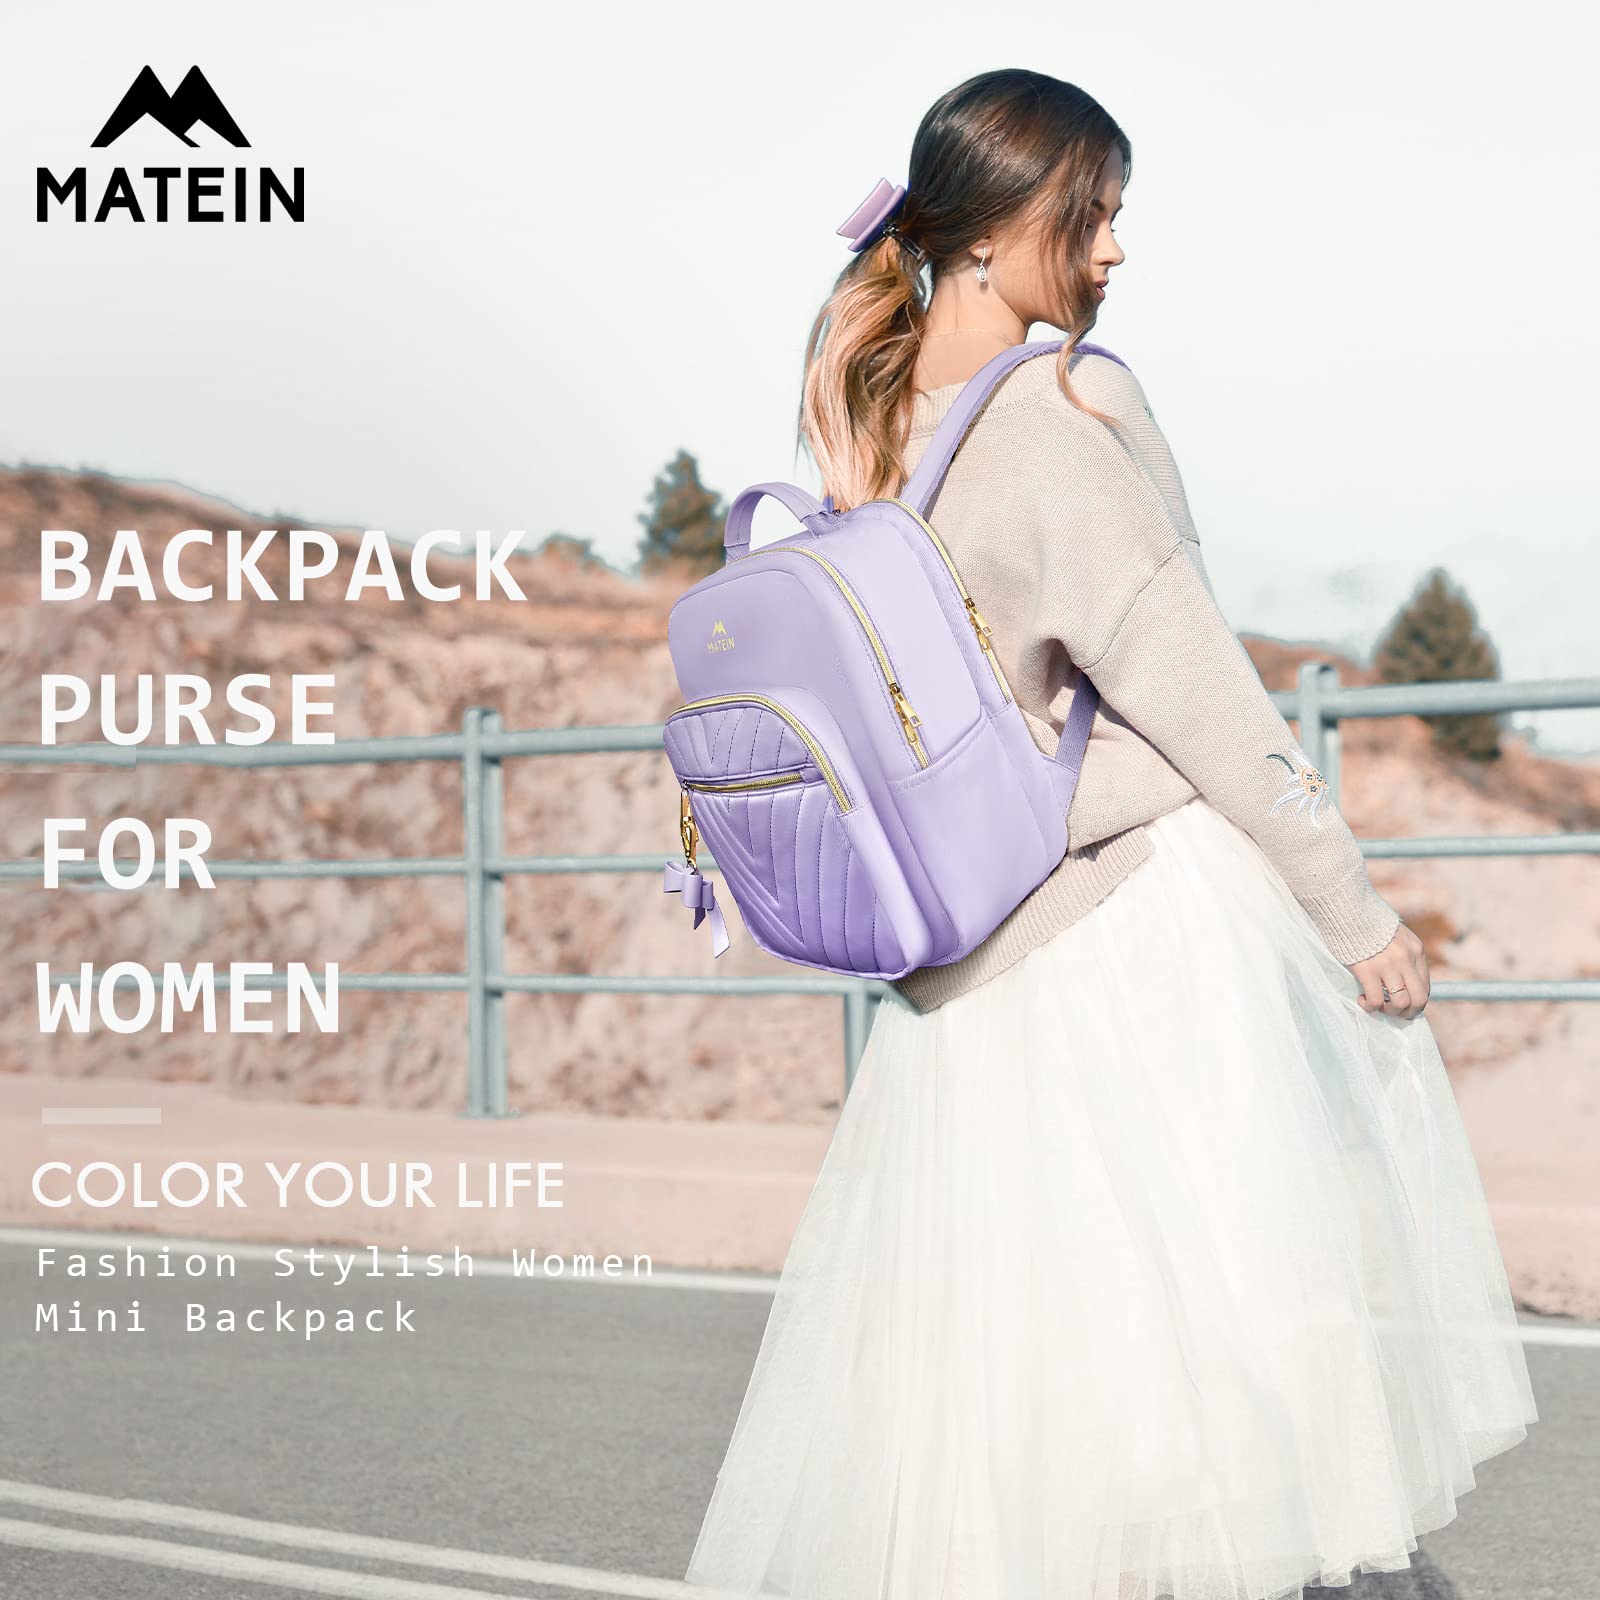 MATEIN Backpack Purse for Women, Small Cute Mini Backpack Purse Shoulder Bag with USB Charging Port